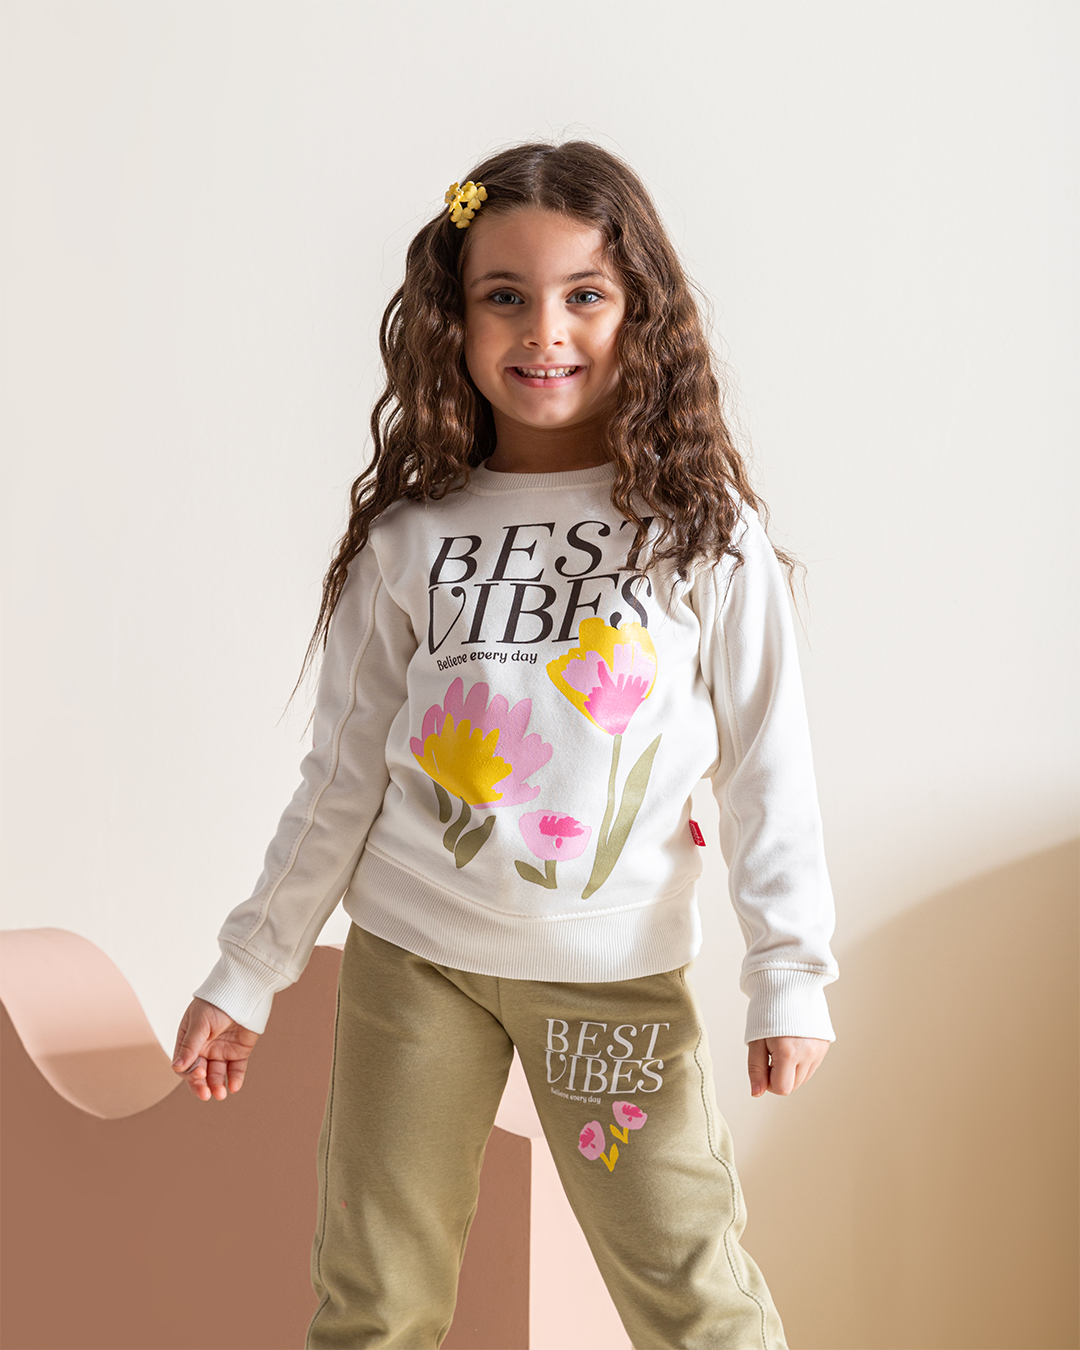 Best vibes Girls' pajamas, Rowand Milton, 2 printed cuts on the chest, cuffs and sleeves + printed trousers